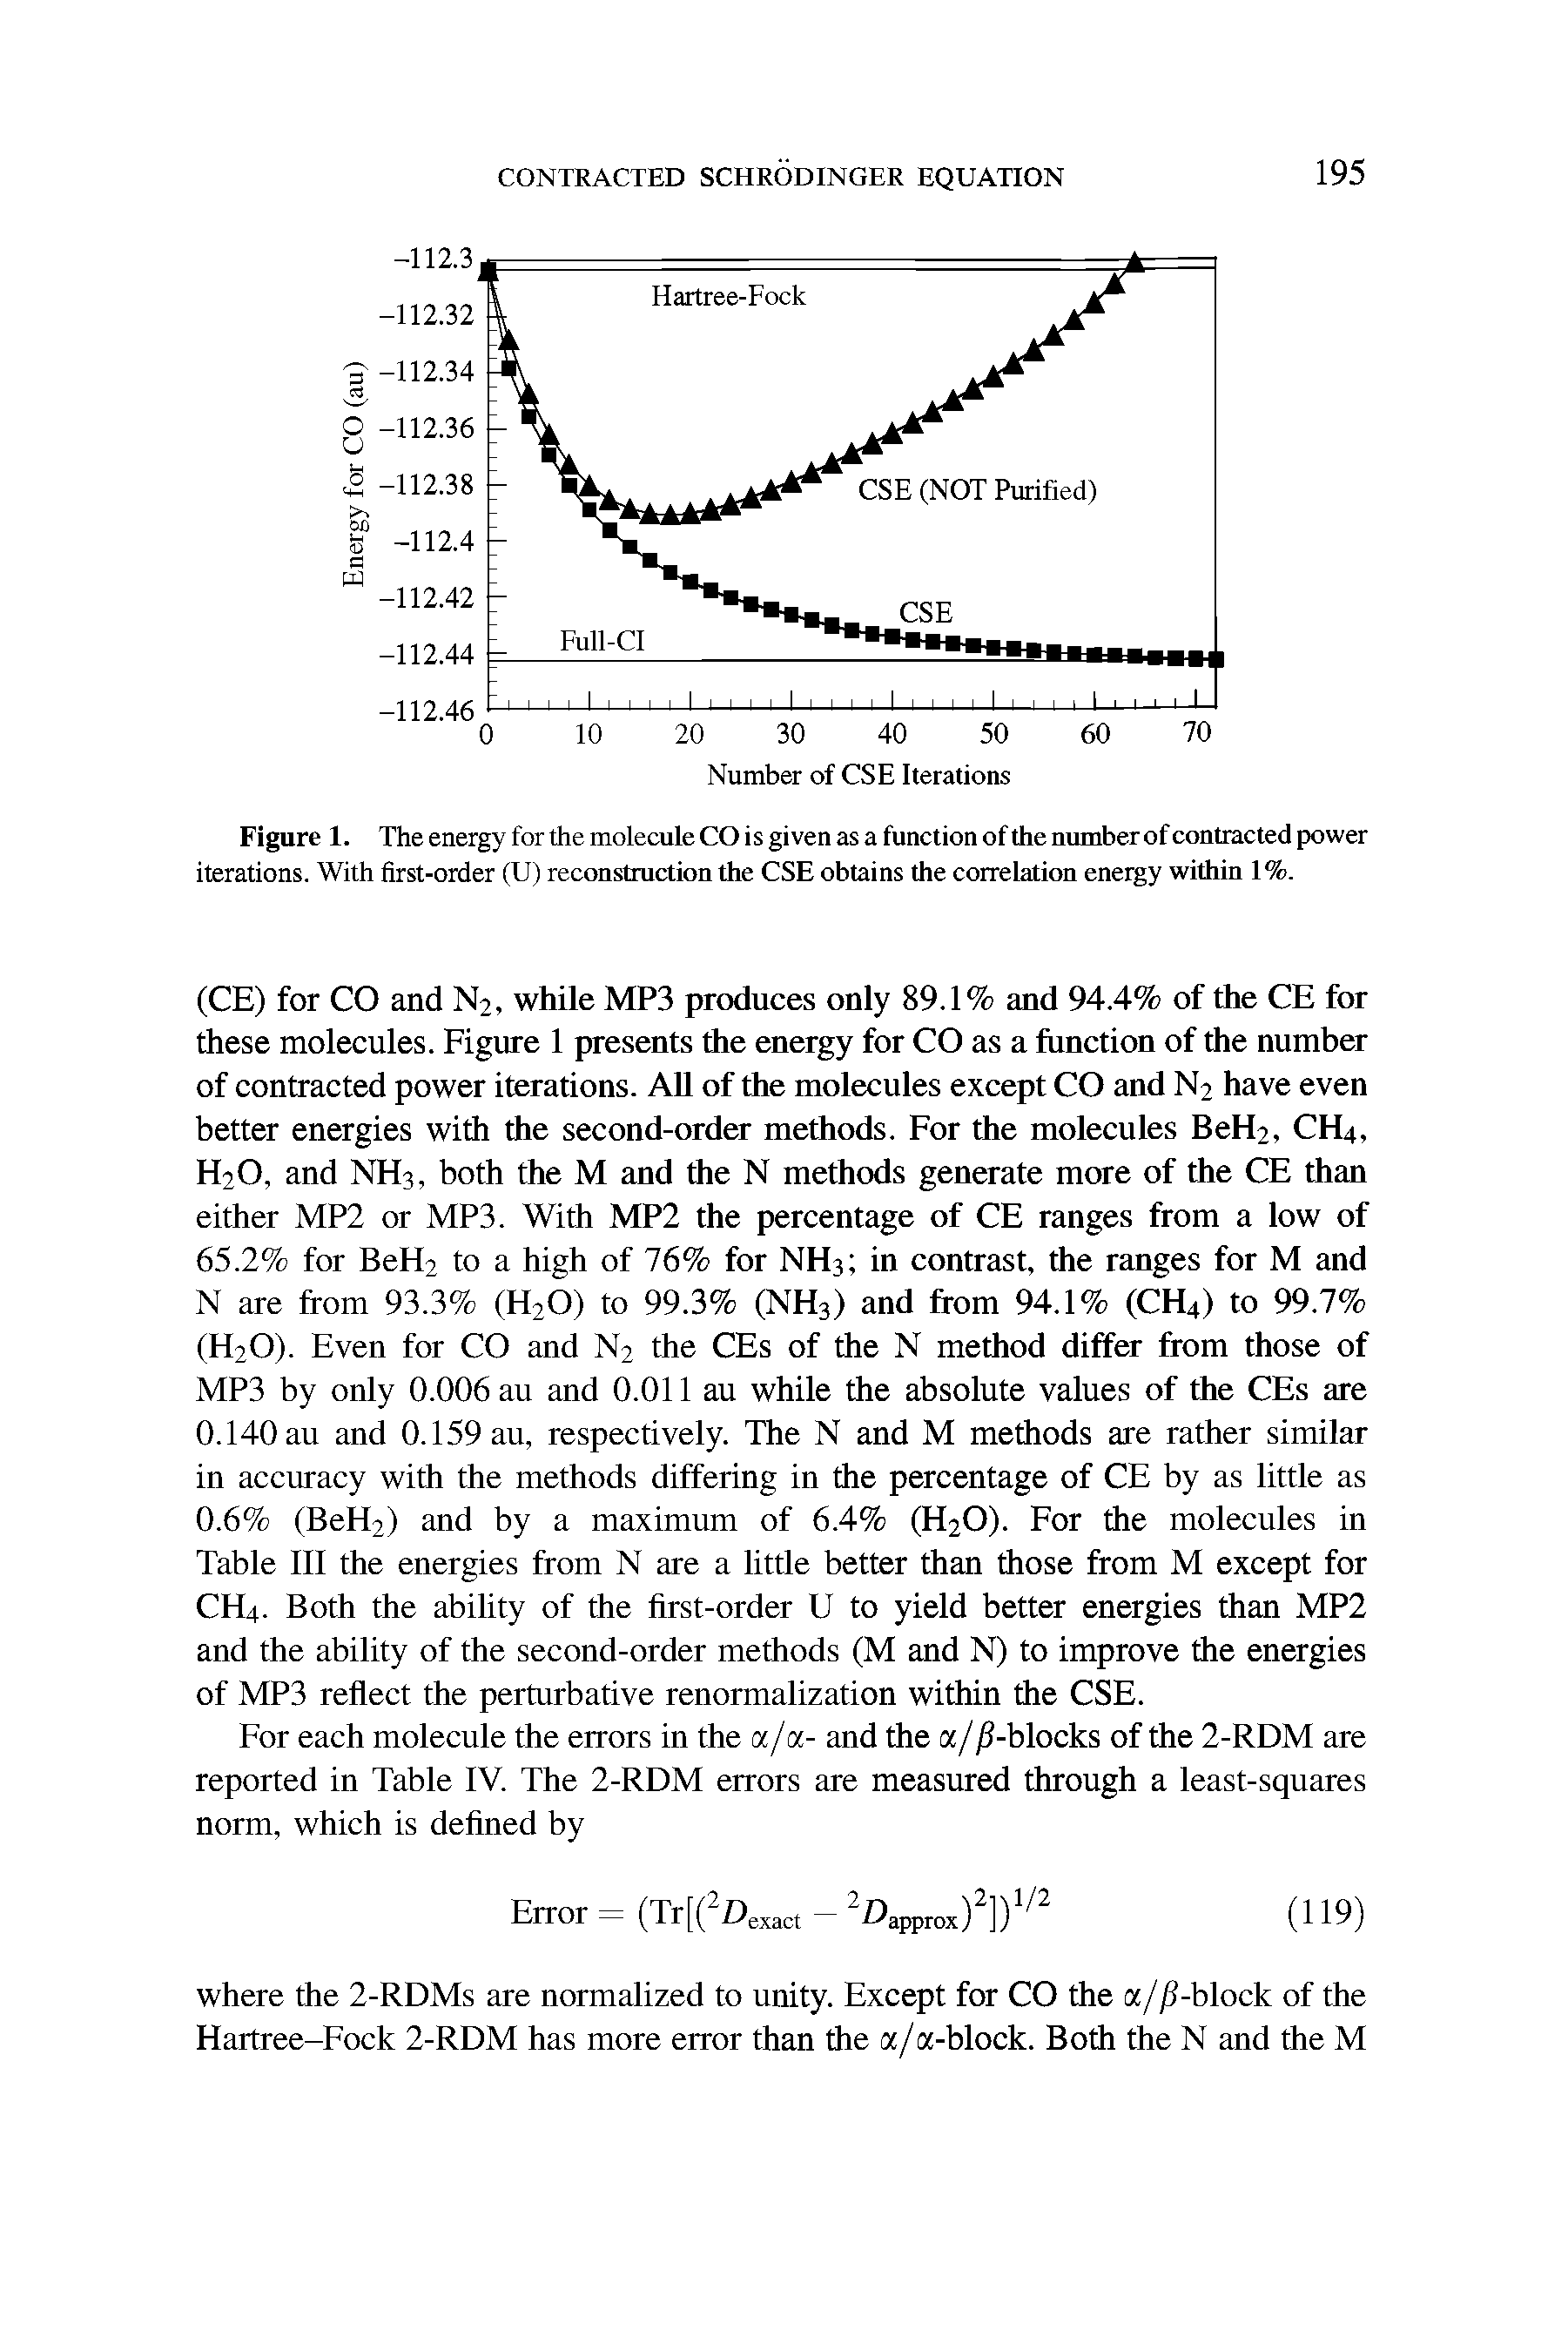 Figure 1. The energy for the molecule CO is given as a function of the number of contracted power iterations. With first-order (U) reconstruction the CSE obtains the correlation energy within 1%.